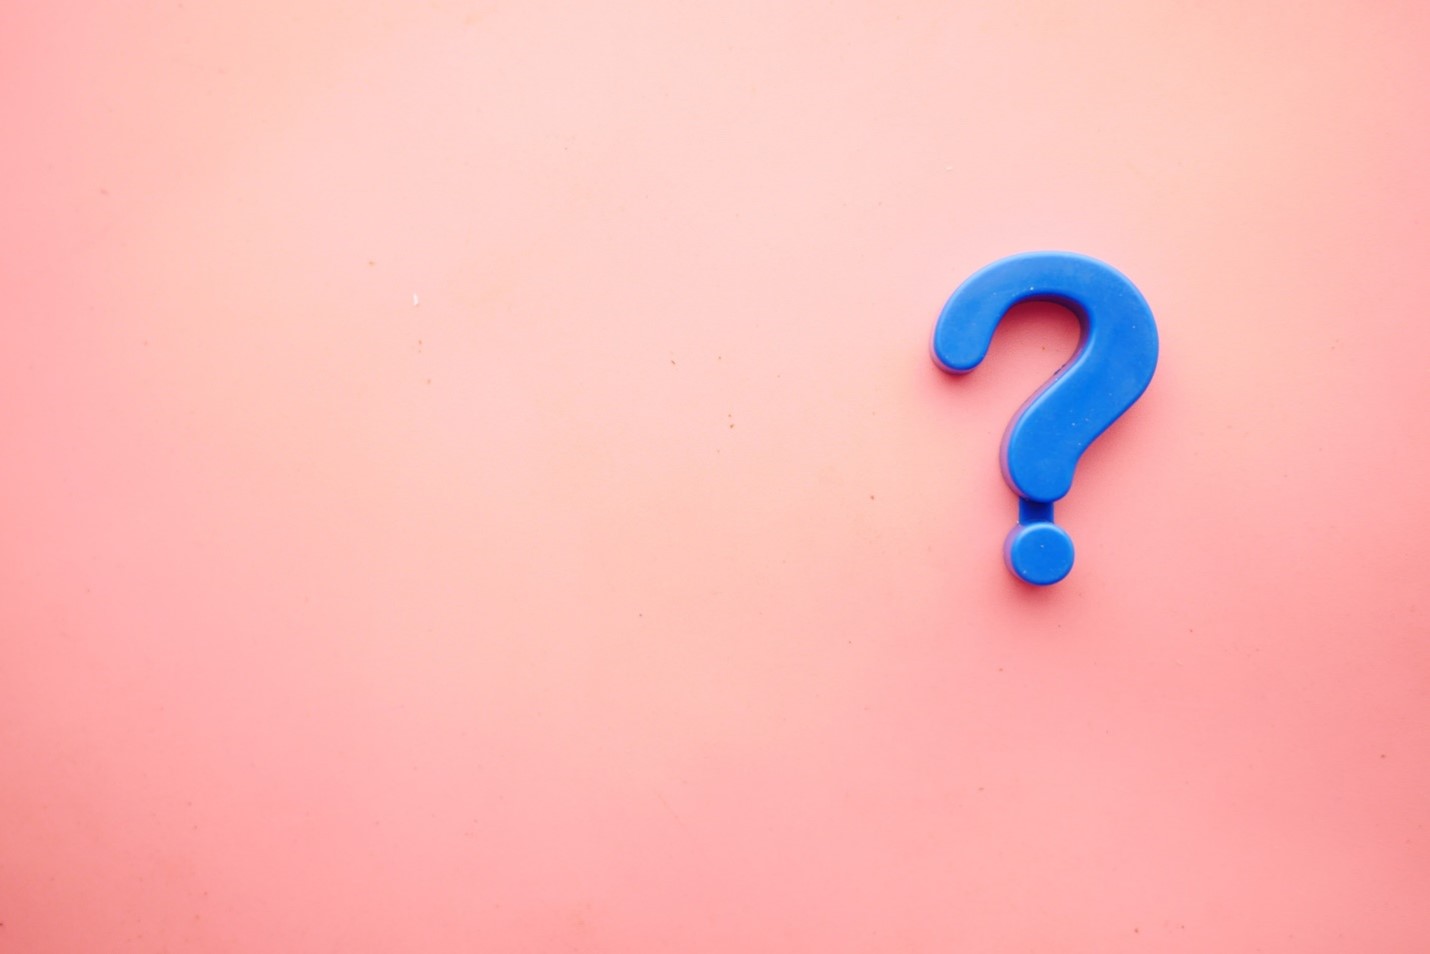 Blue question mark against light pink background